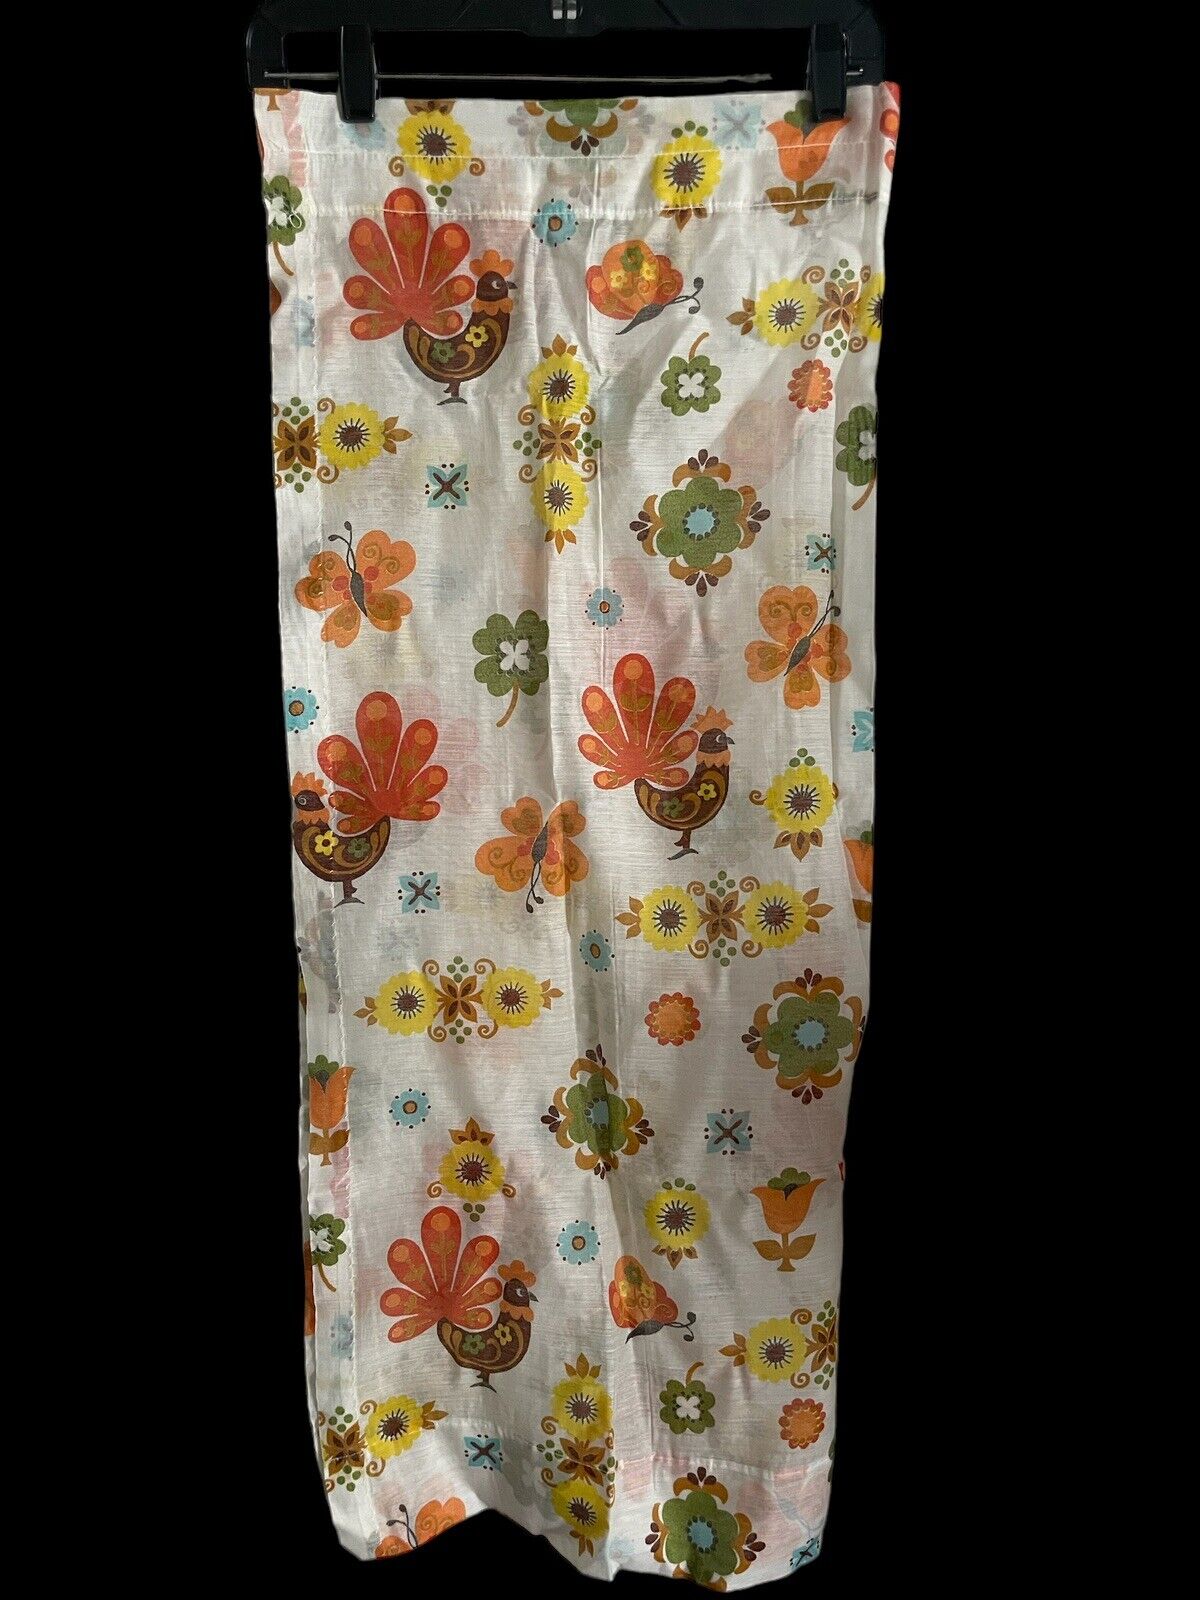 2 Vintage Sheer Flower Power Rooster Butterfly Curtain Tiers 35”Lx29”W Hippie